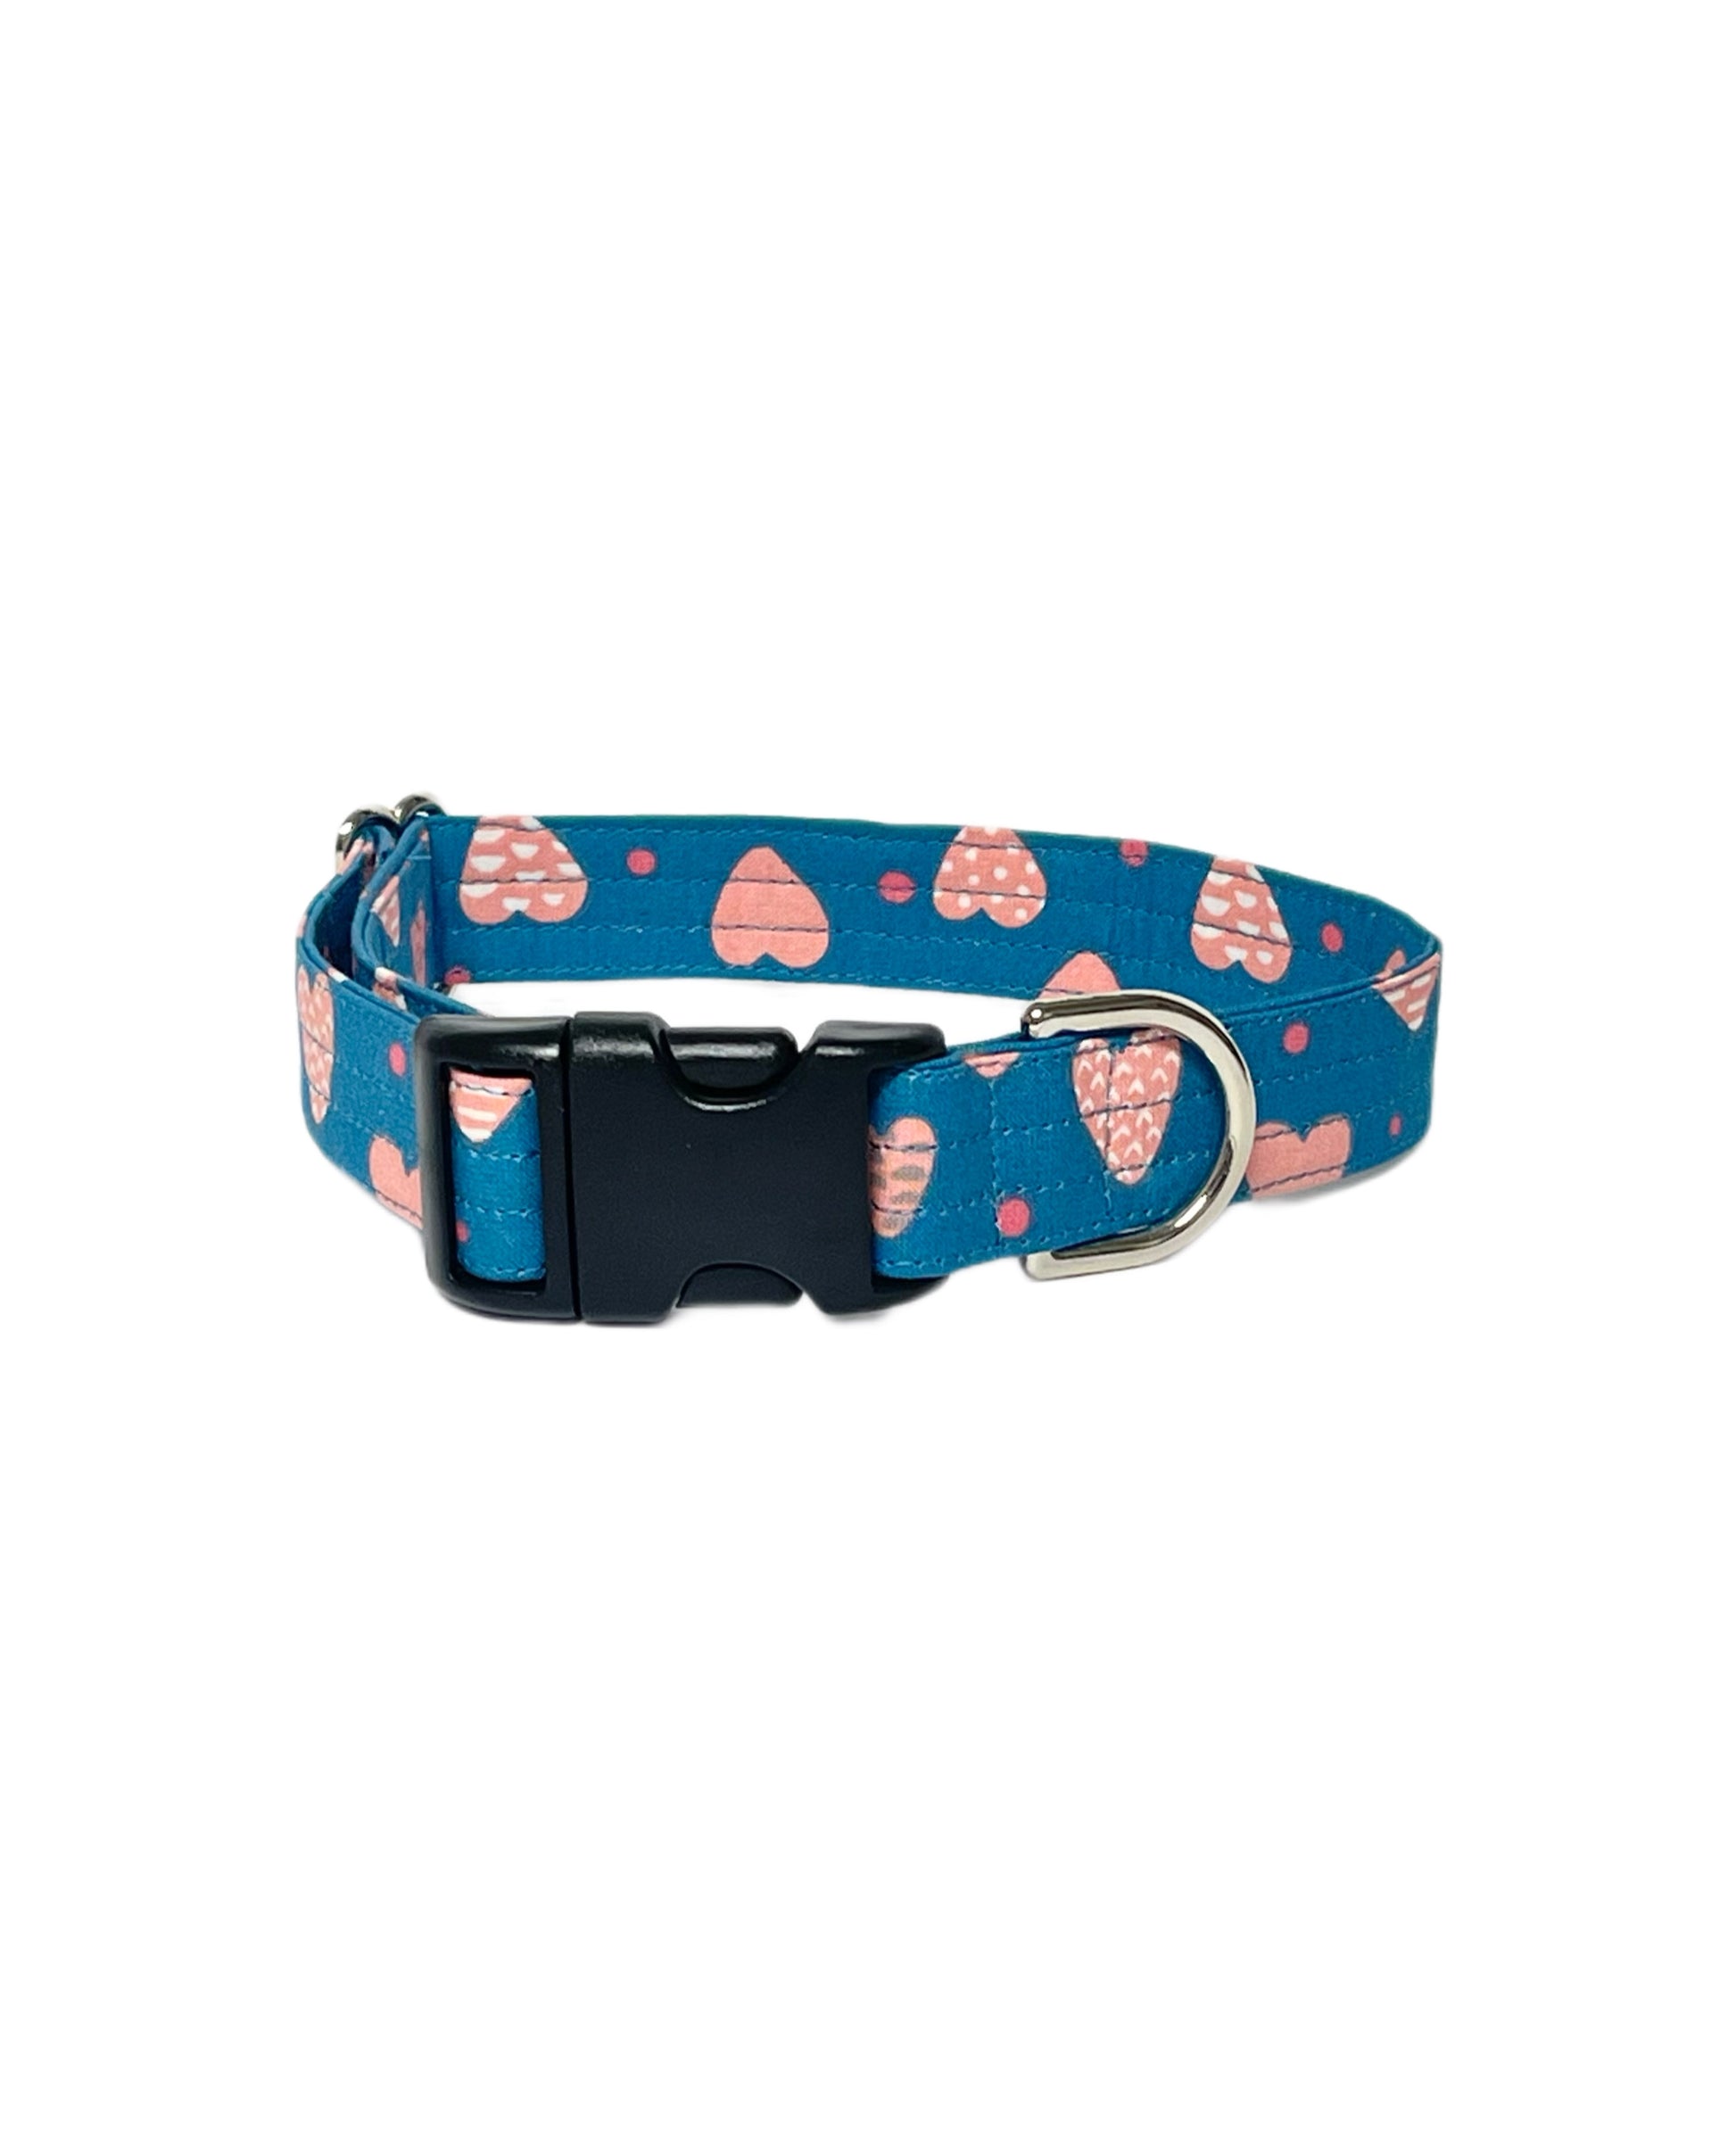 blue with pink heart dog collar with engraved buckle